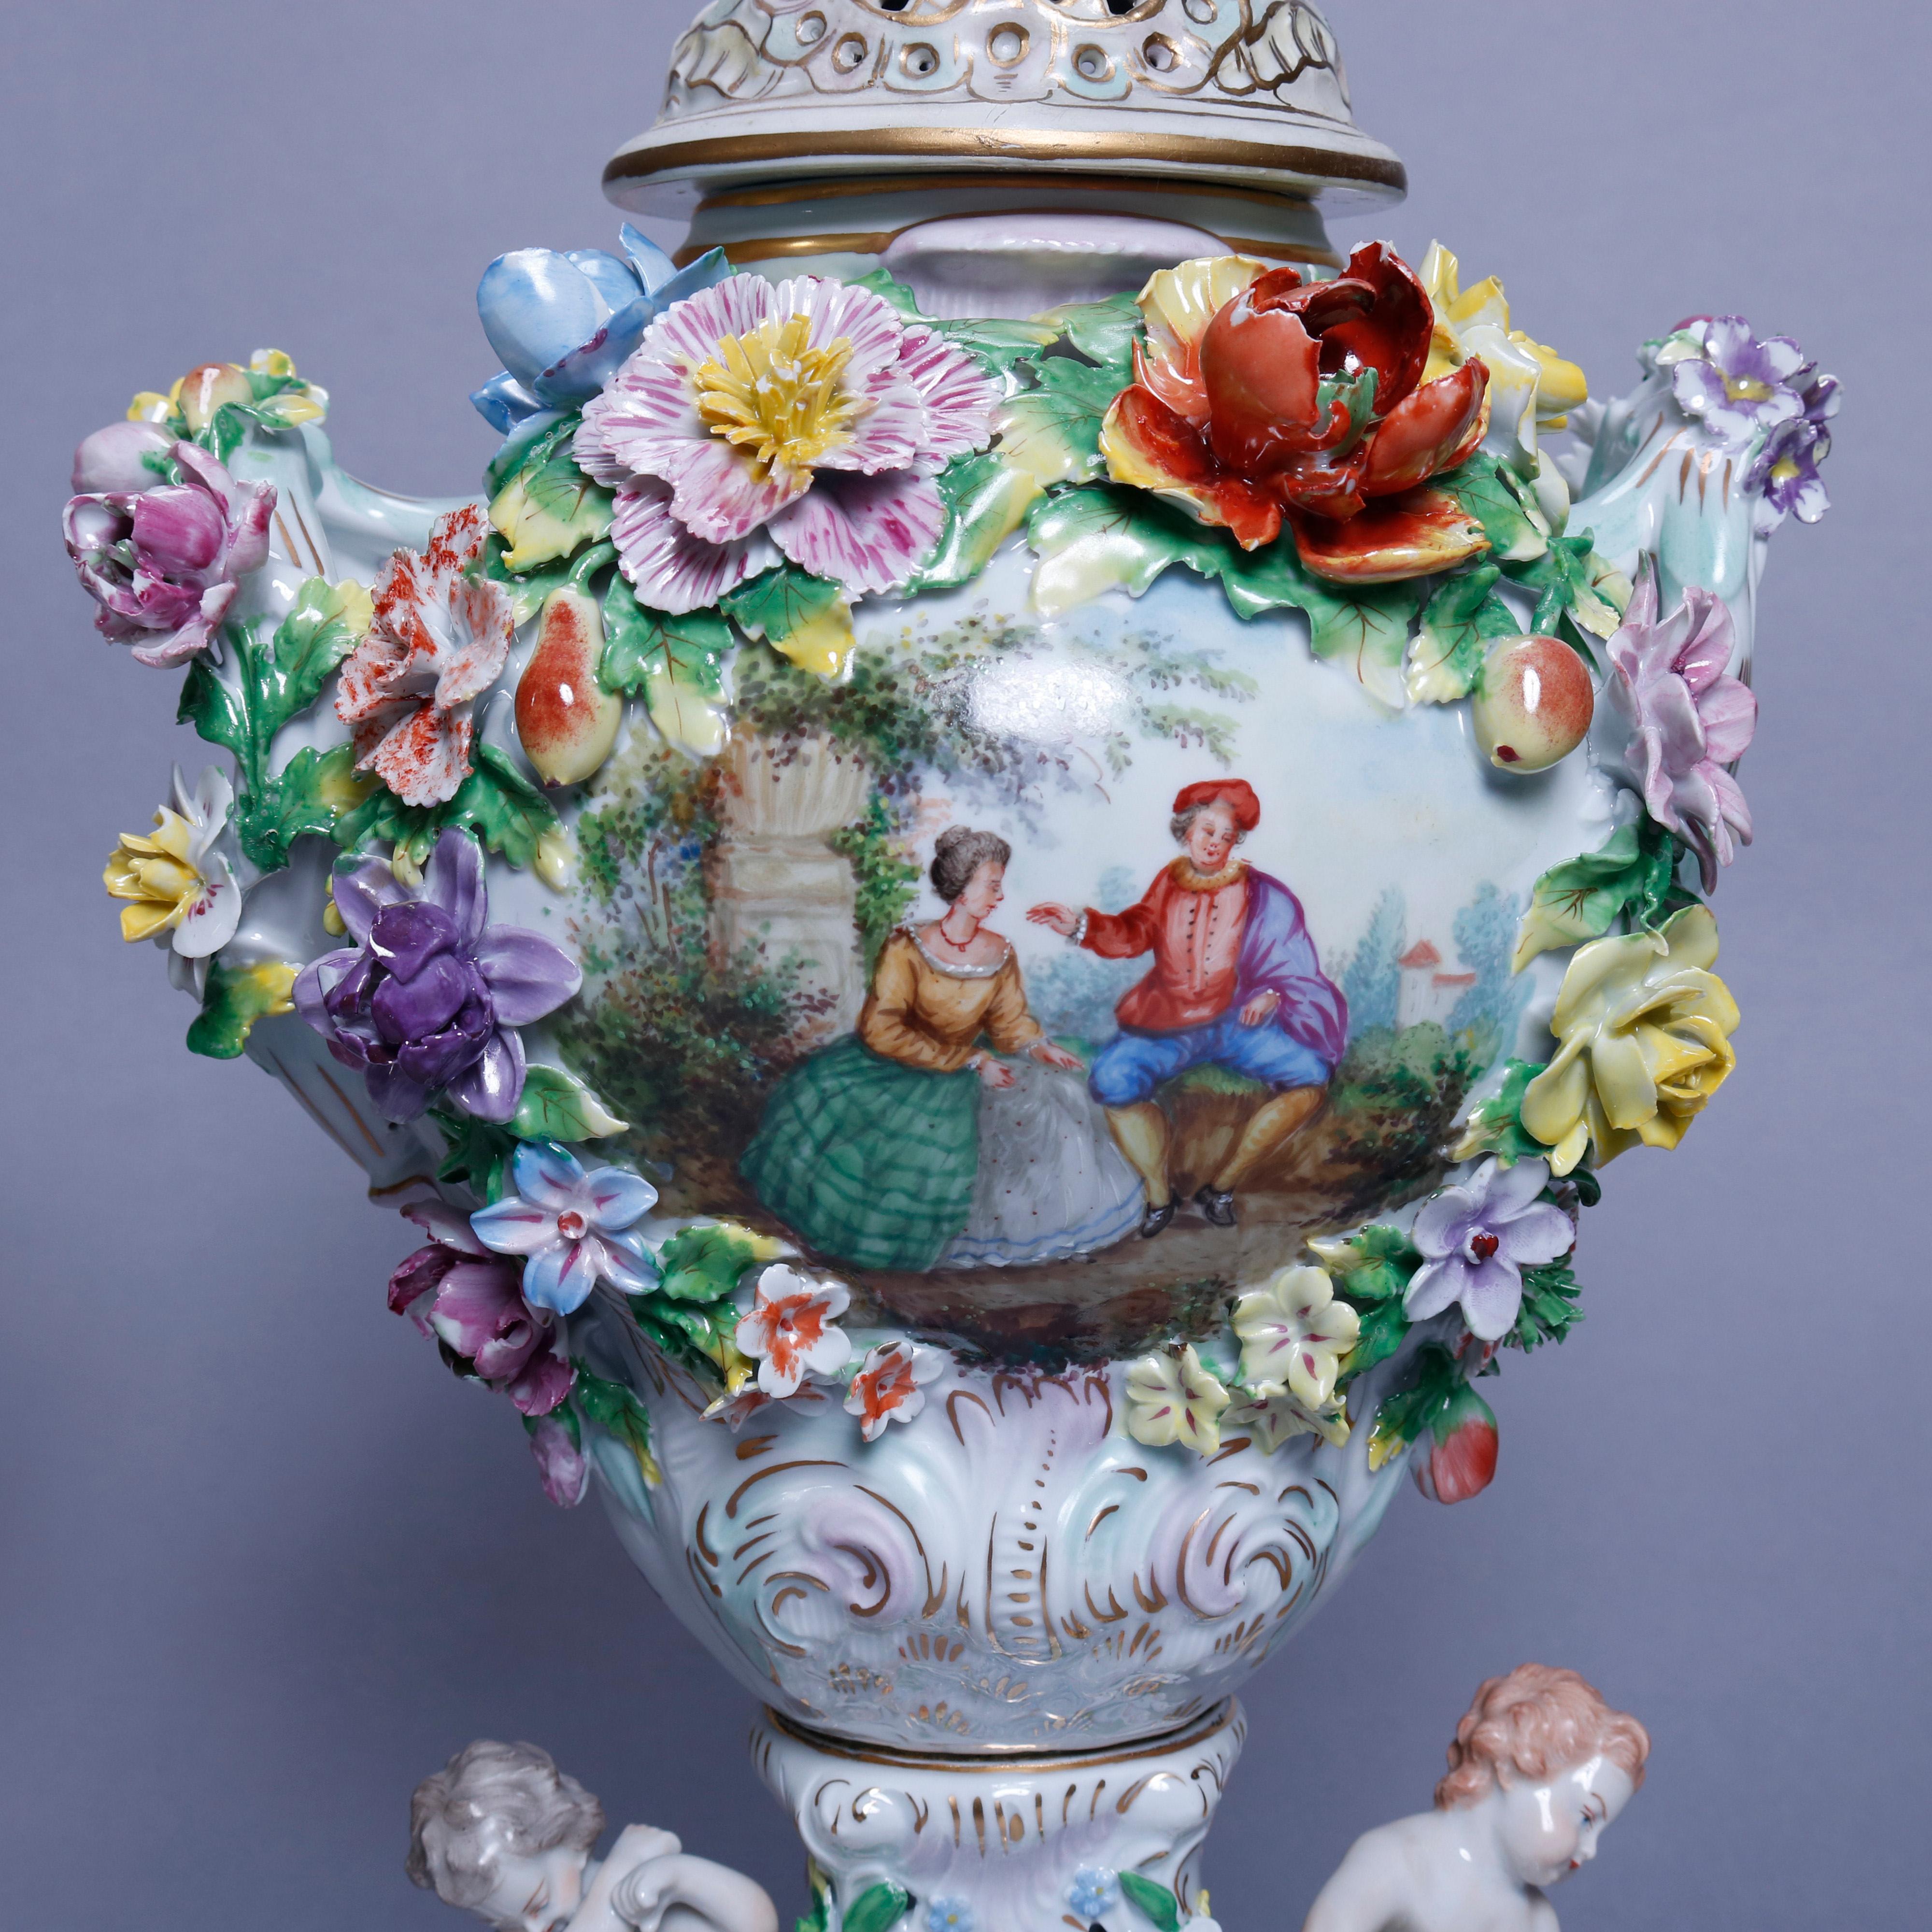 An antique pair of classical German Dresden porcelain urns each offer central hand painted reserve depicting courting scenes in countryside setting, en verso floral reserve, overall applied flowers, raised on pierced plinth with garden flowers and